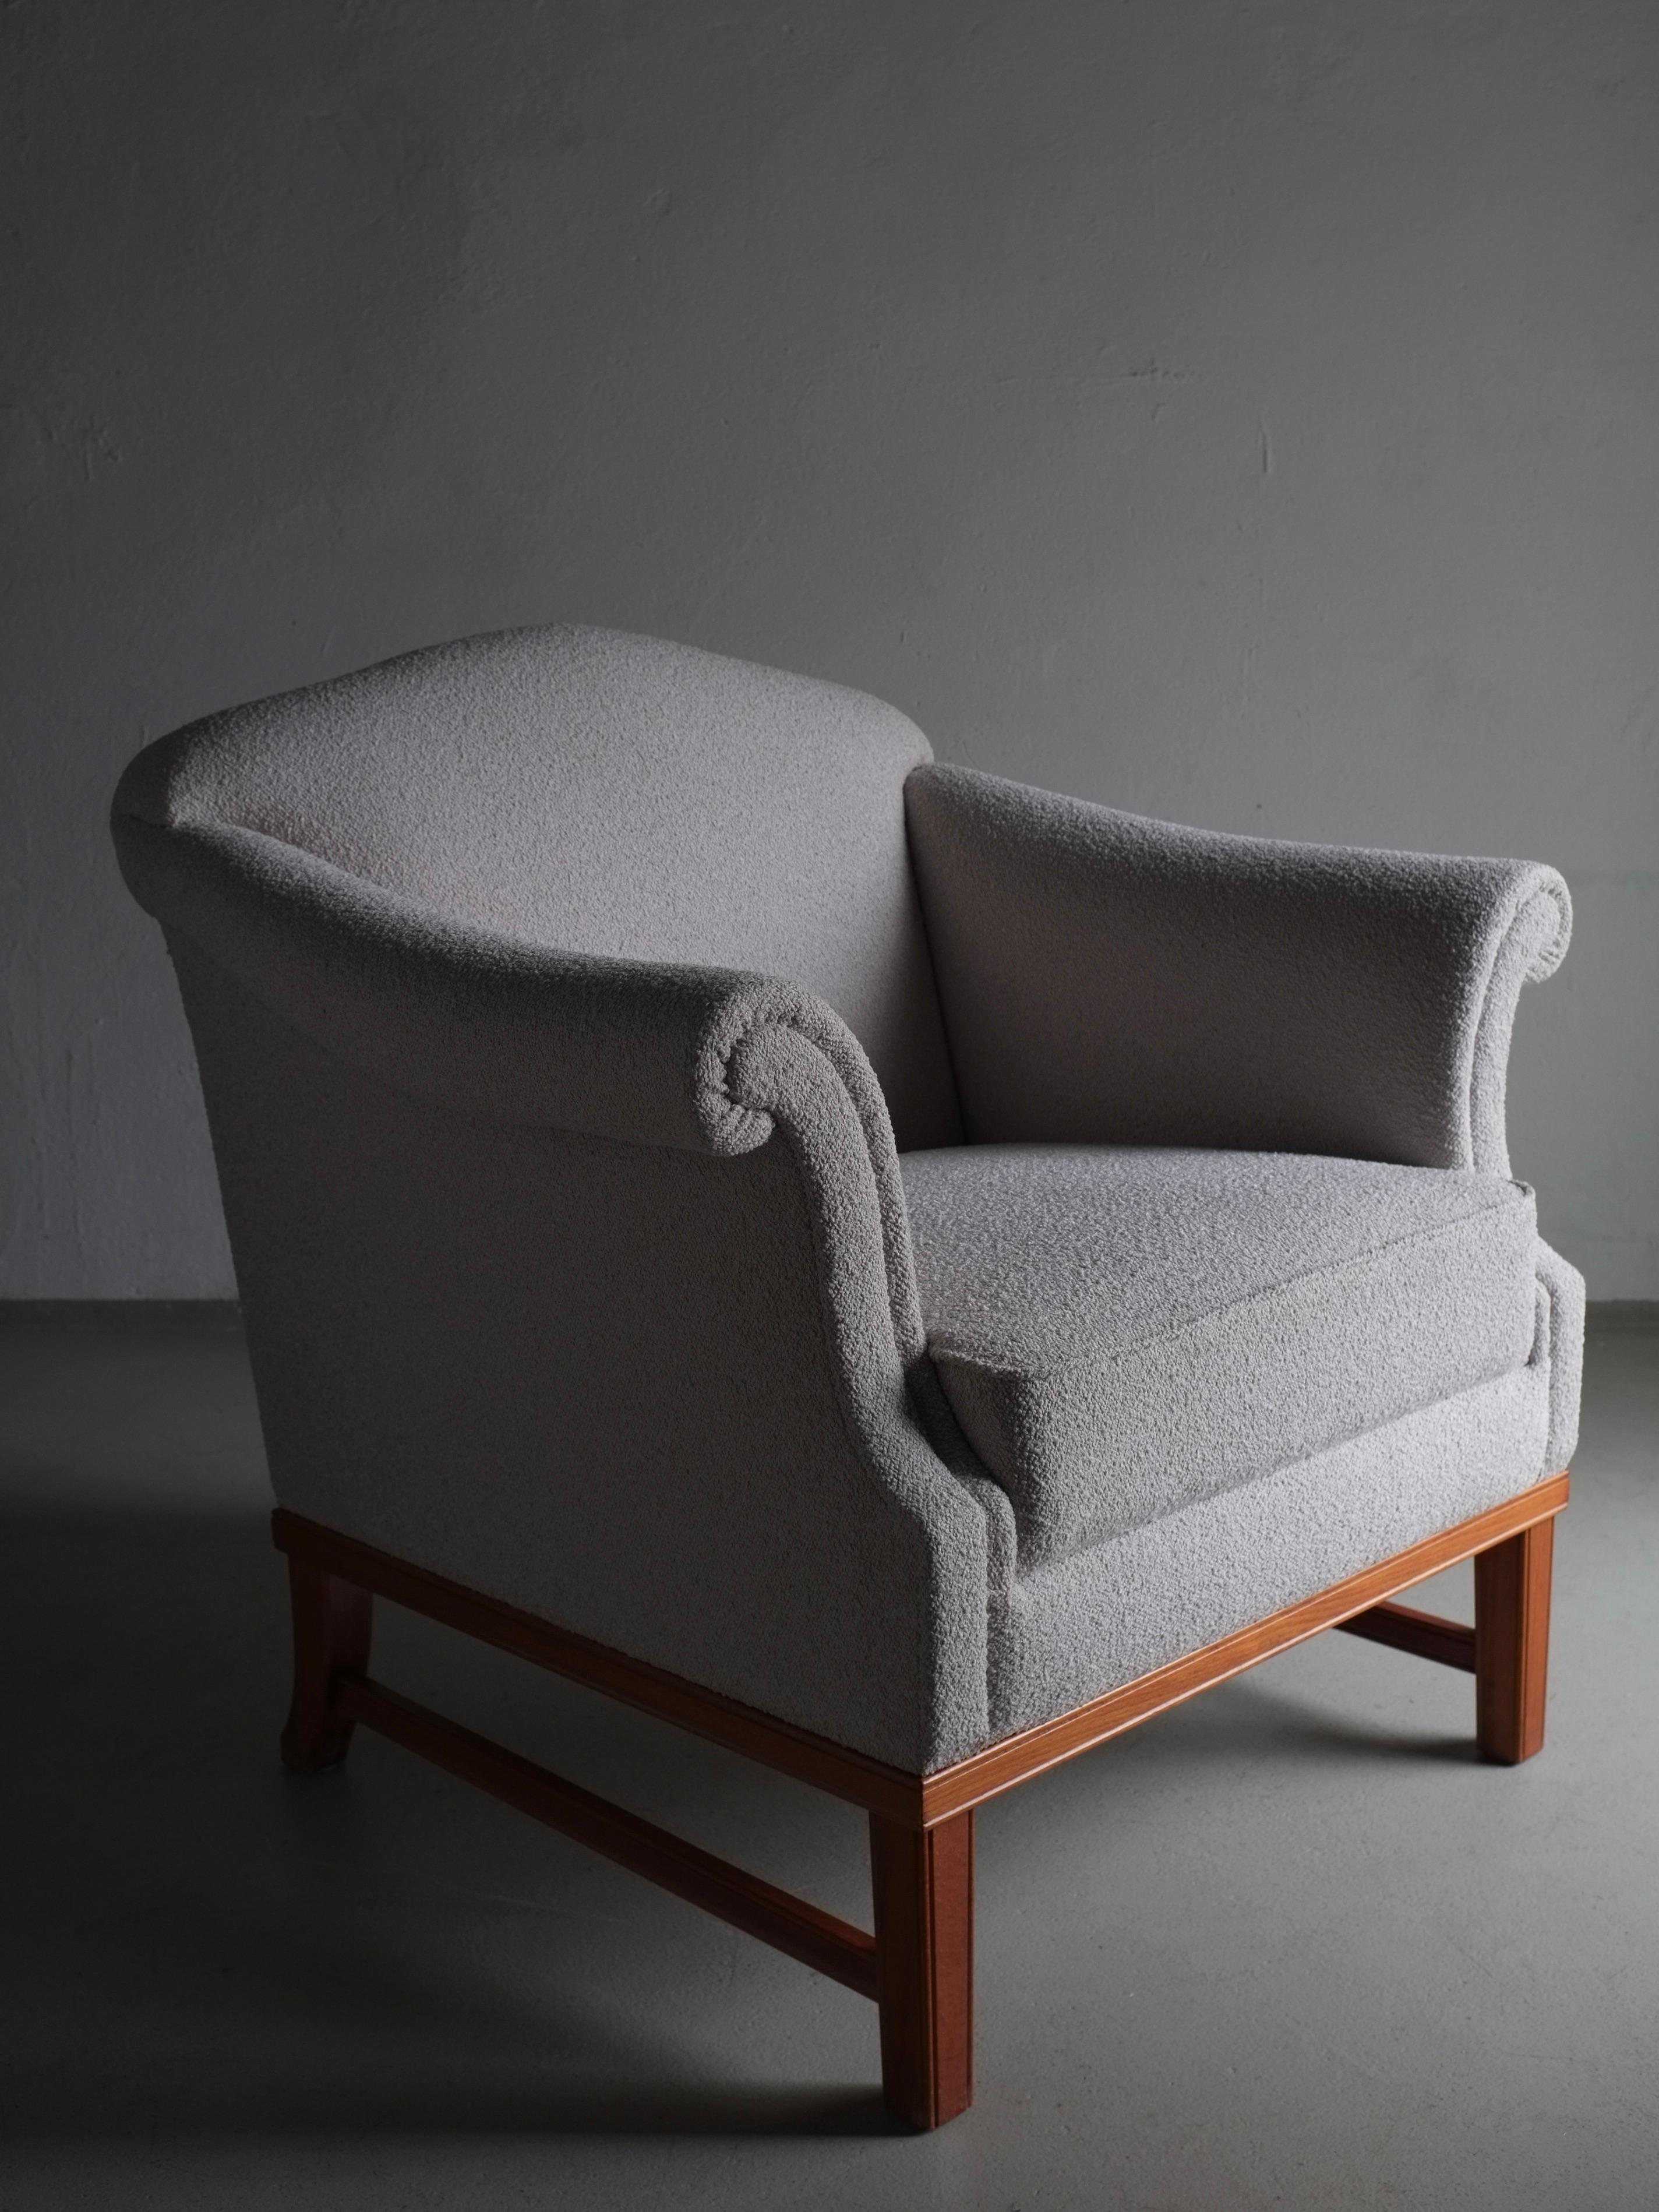 Pearl gray lounge chair with a carved back detail and wooden frame, newly upholstered with Dedar boucle fabric. I have two chairs in navy and one in pearl gray.

Additional information:
Country of manufacture: Sweden
Period: 1940s
Dimensions: W 83